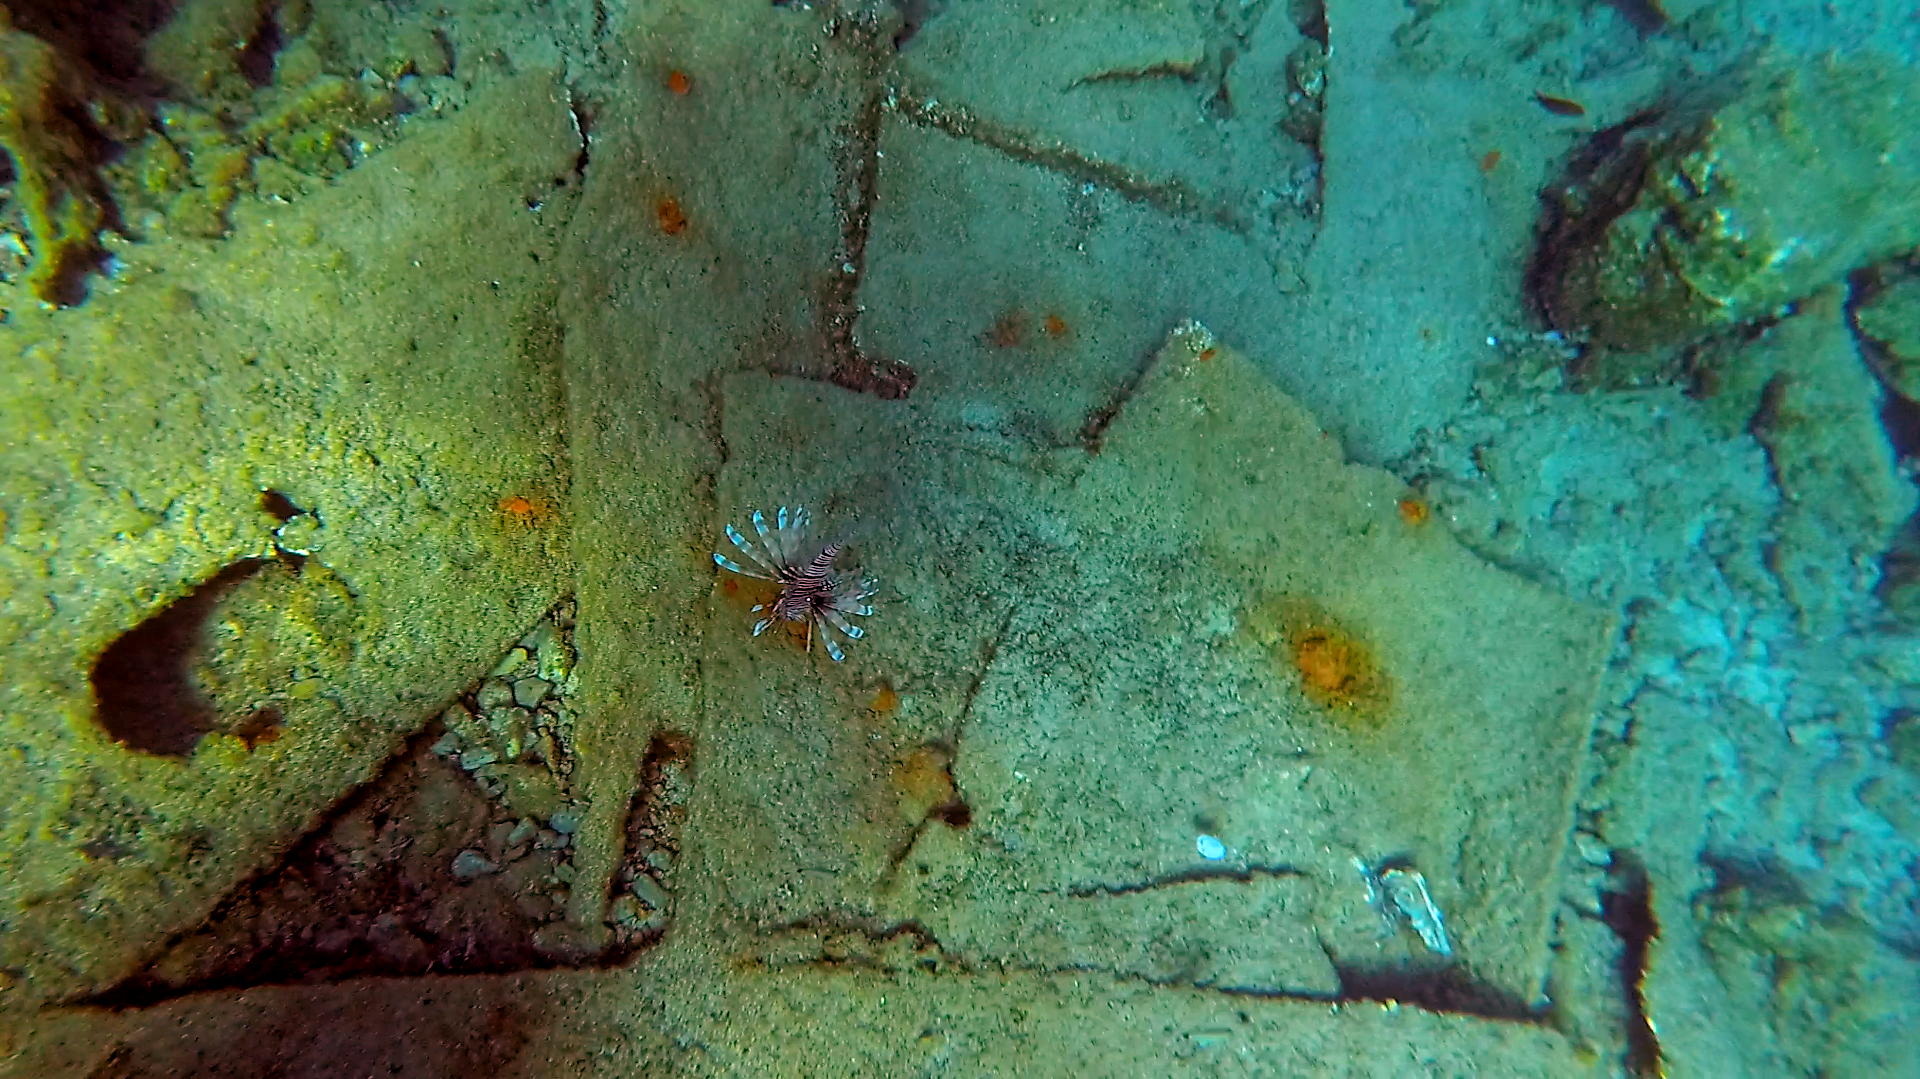 Lionfish on the shipwreck in Falasarna